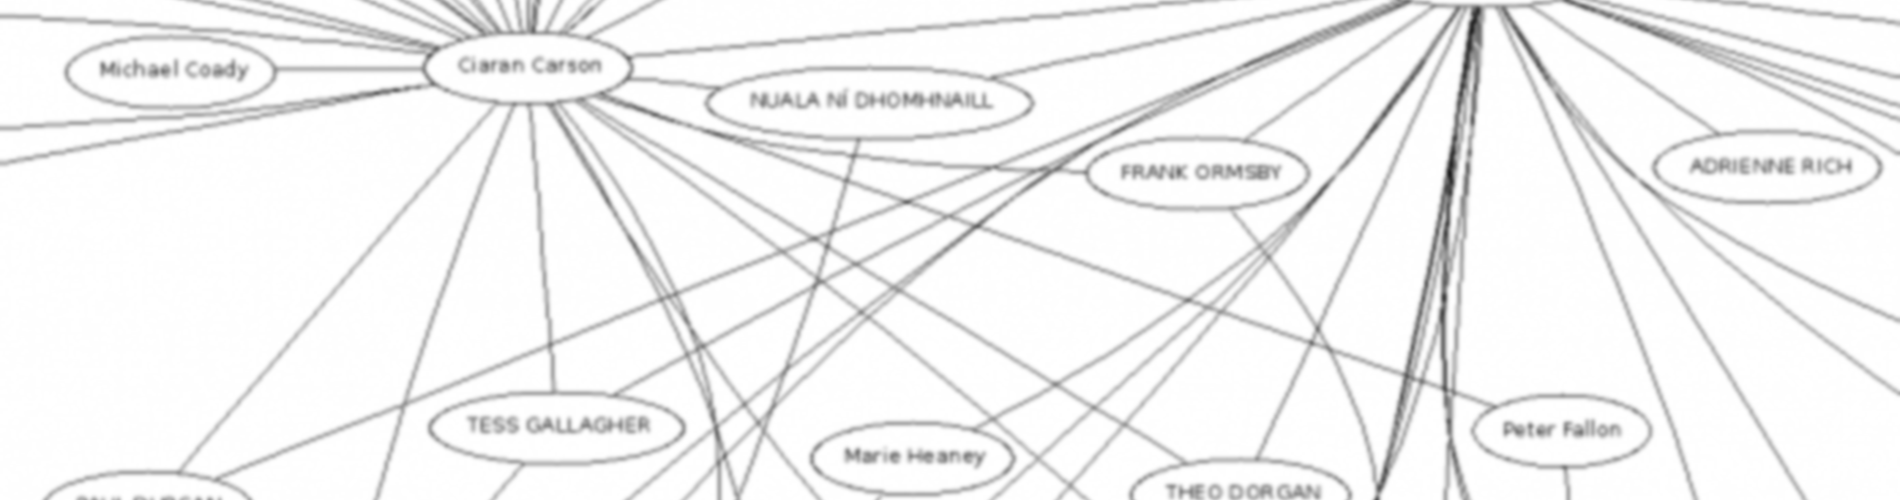 Graph of correspondents from 4 Irish Finding Aids feature image